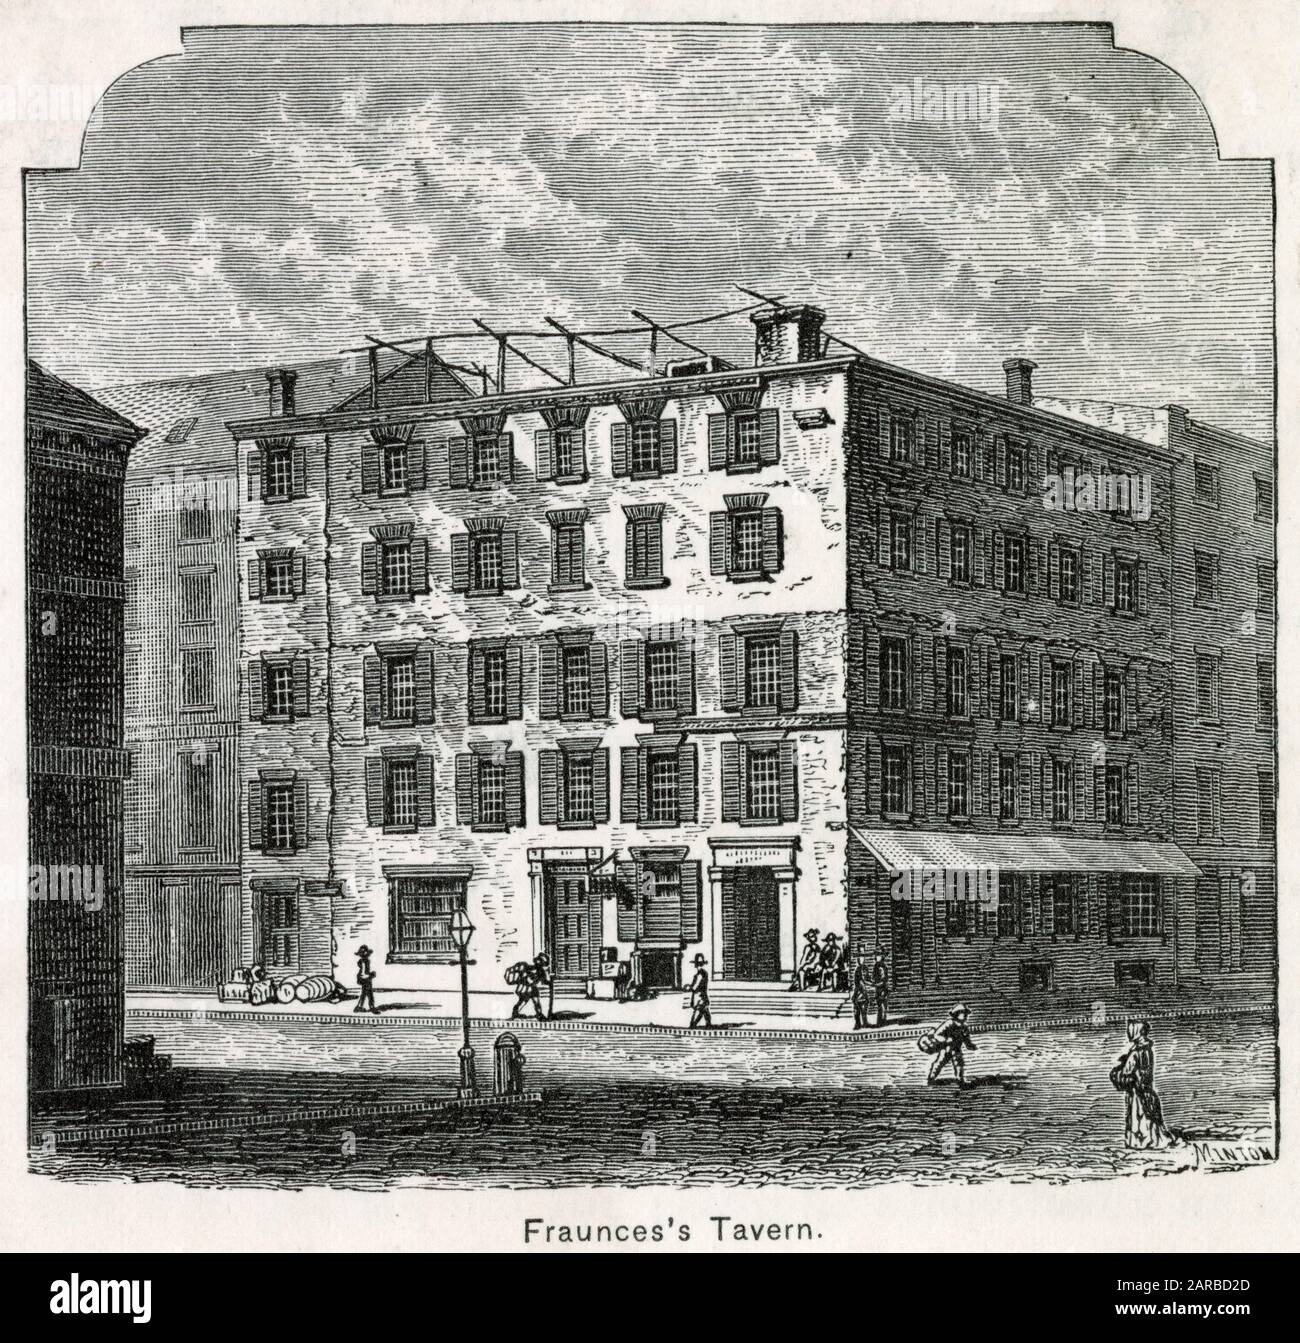 Fraunce's Tavern situated at 54 Pearl Street at the corner of Broad Street.In New York During The American War of Independence     Date: 1783 Stock Photo